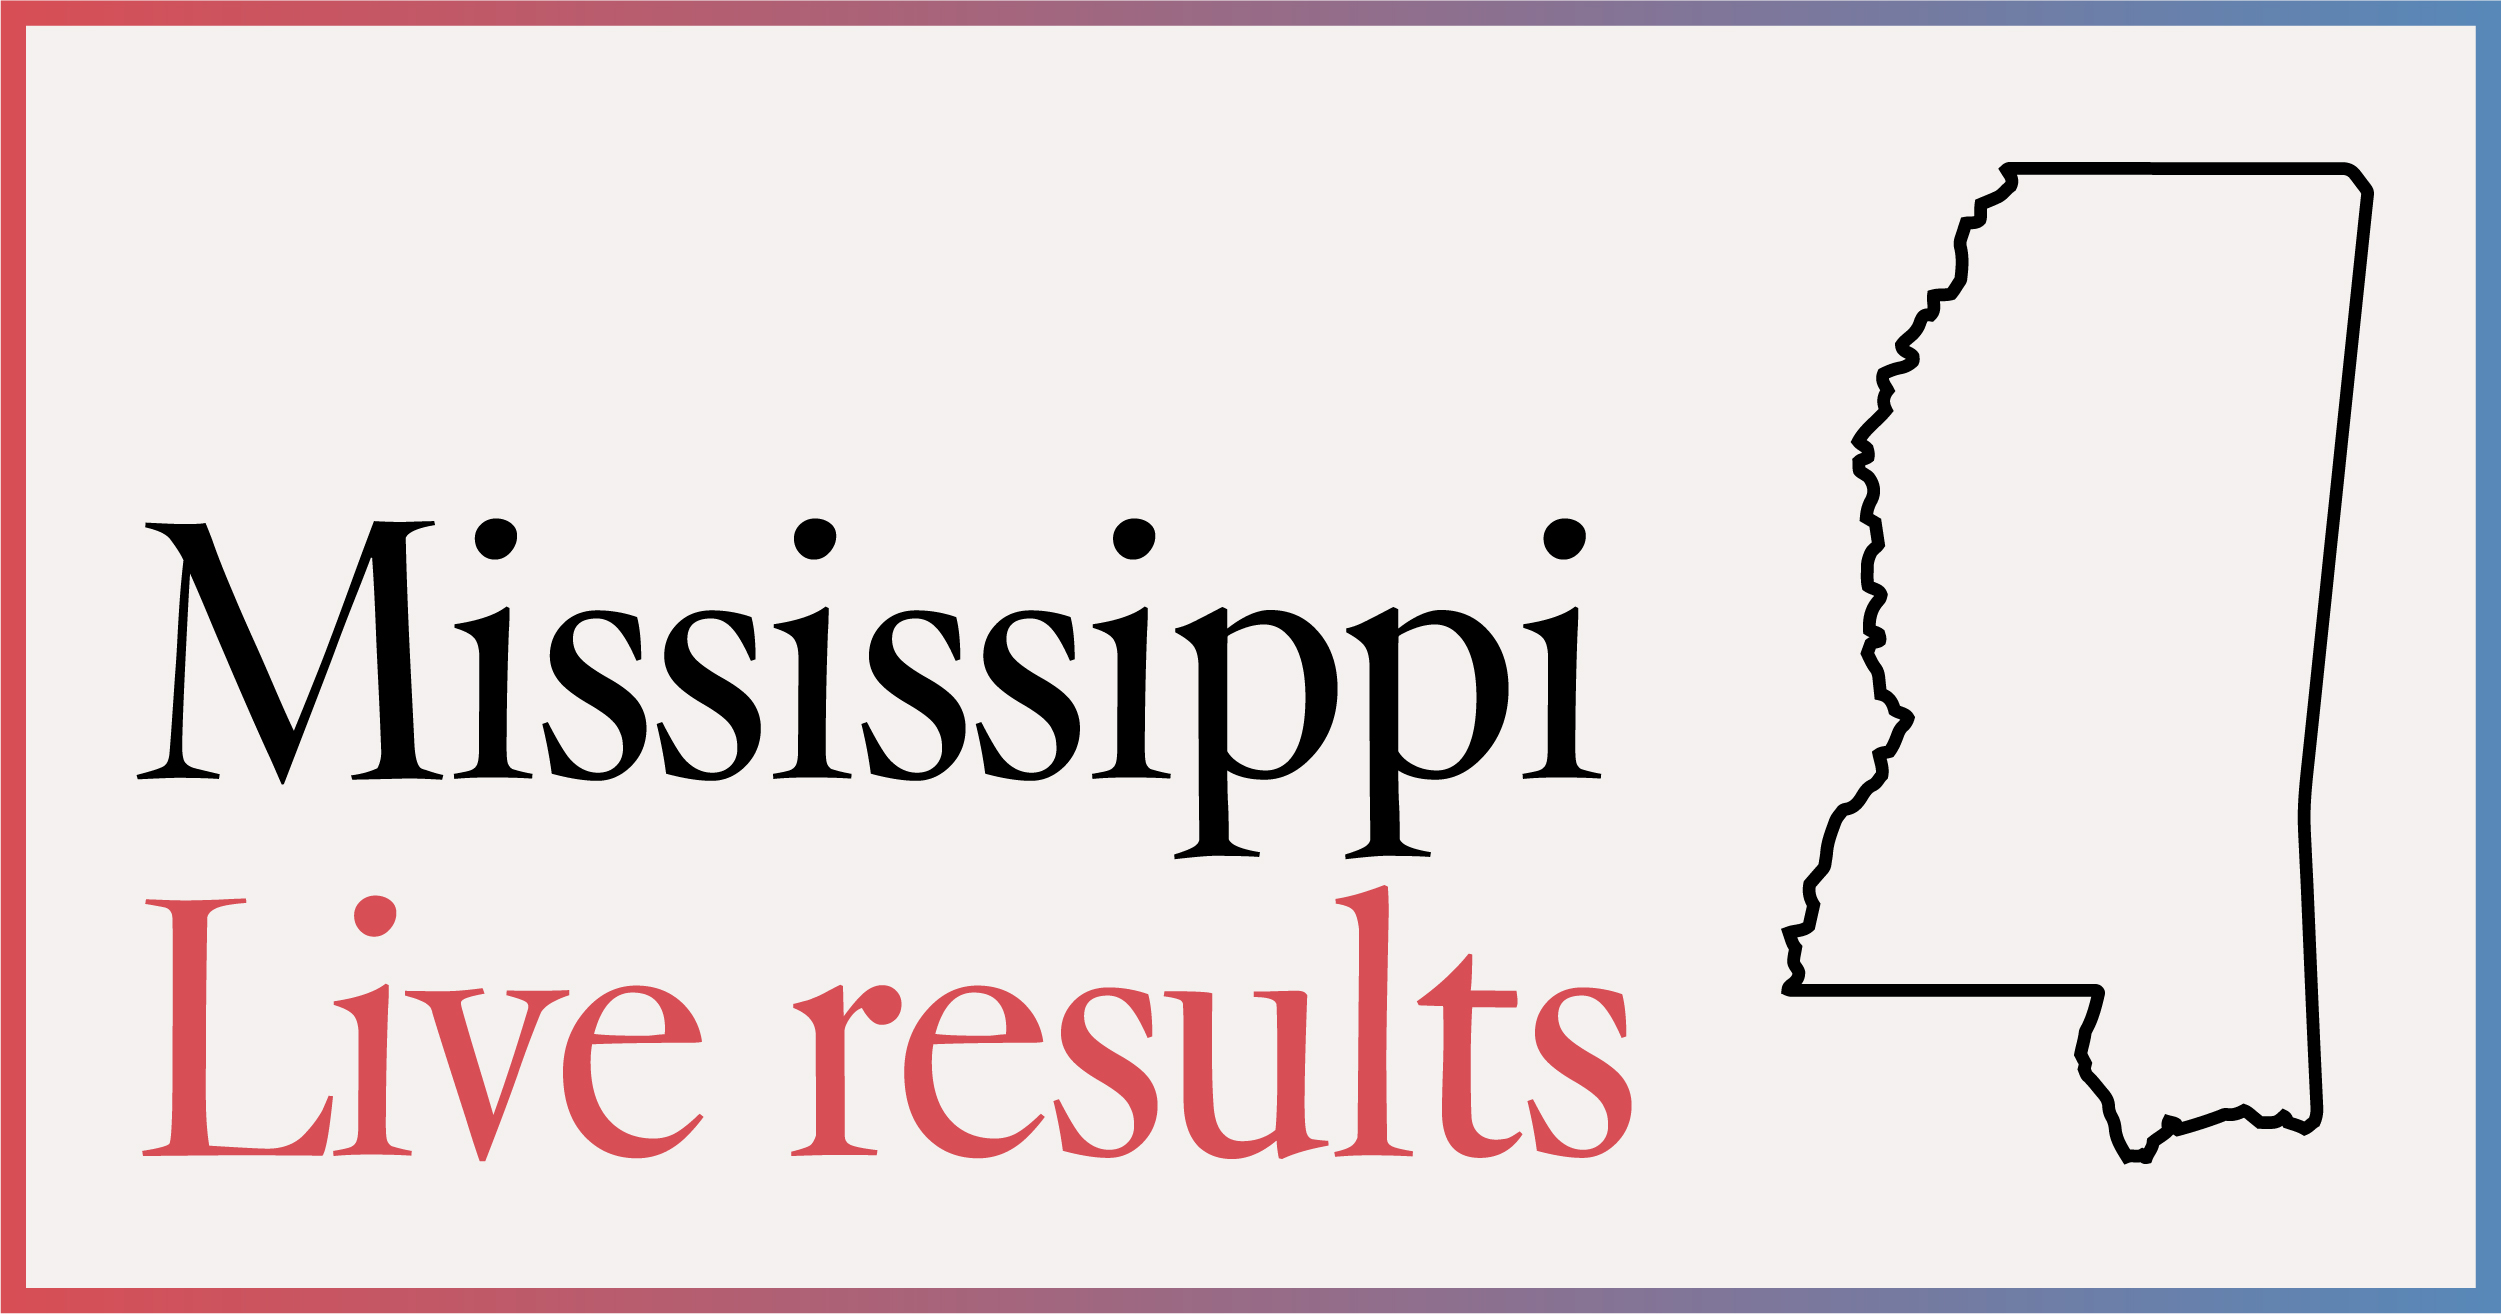 2020 Mississippi election: Live results - Los Angeles Times